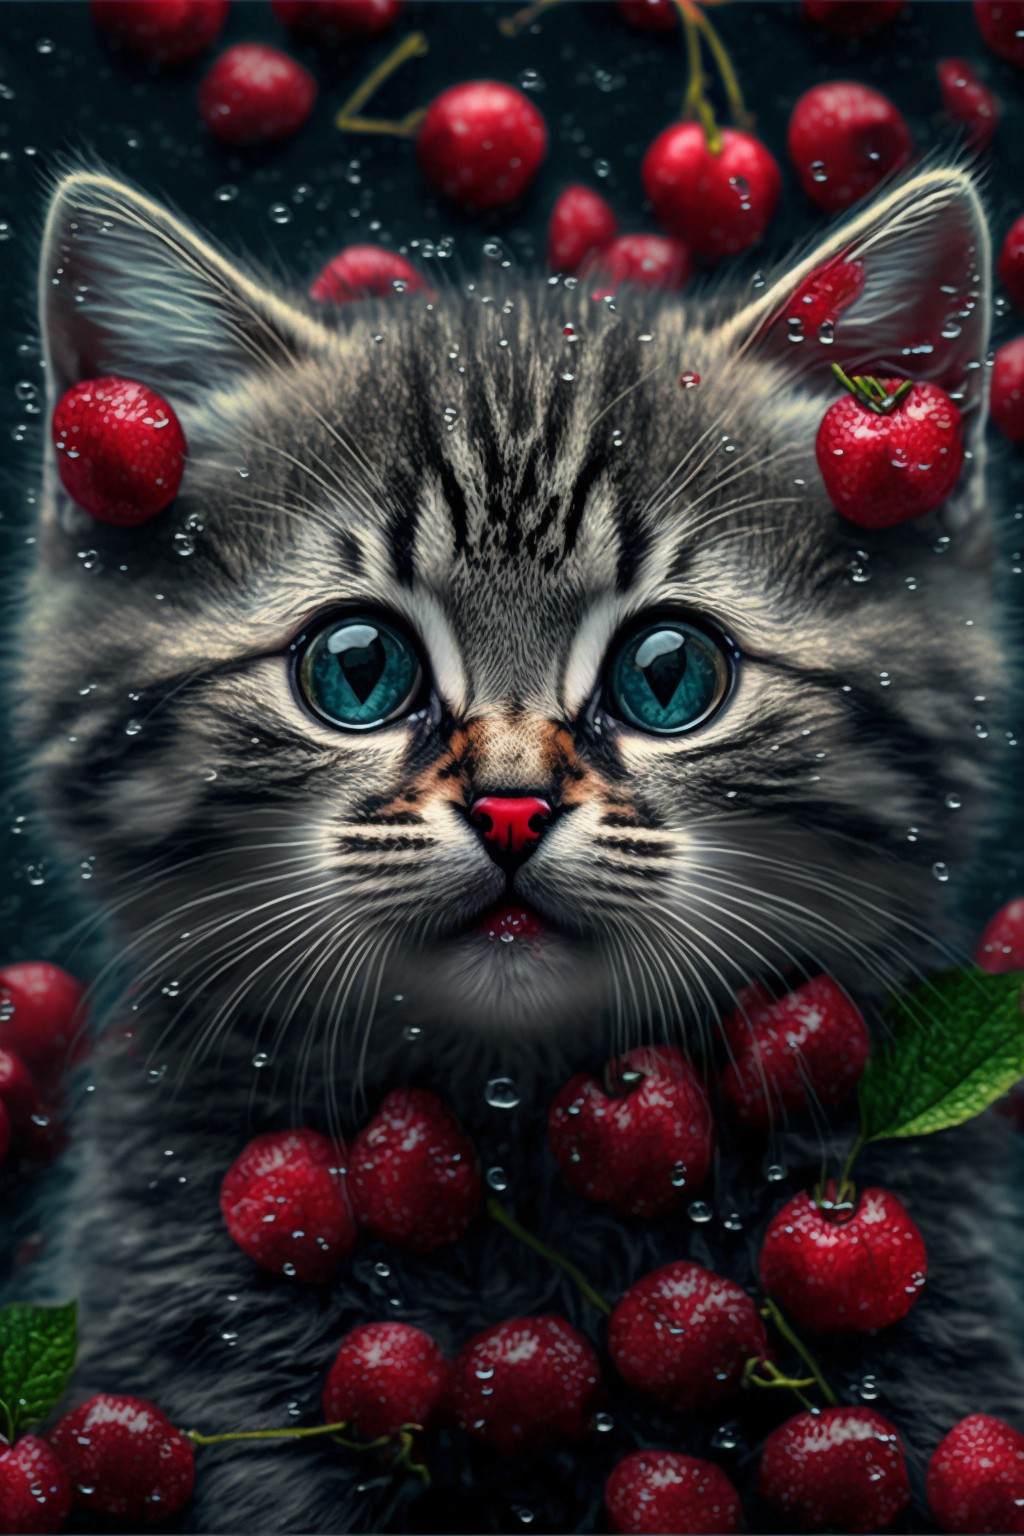 7 images of Cute kitten and cherries beside it by Midjourney